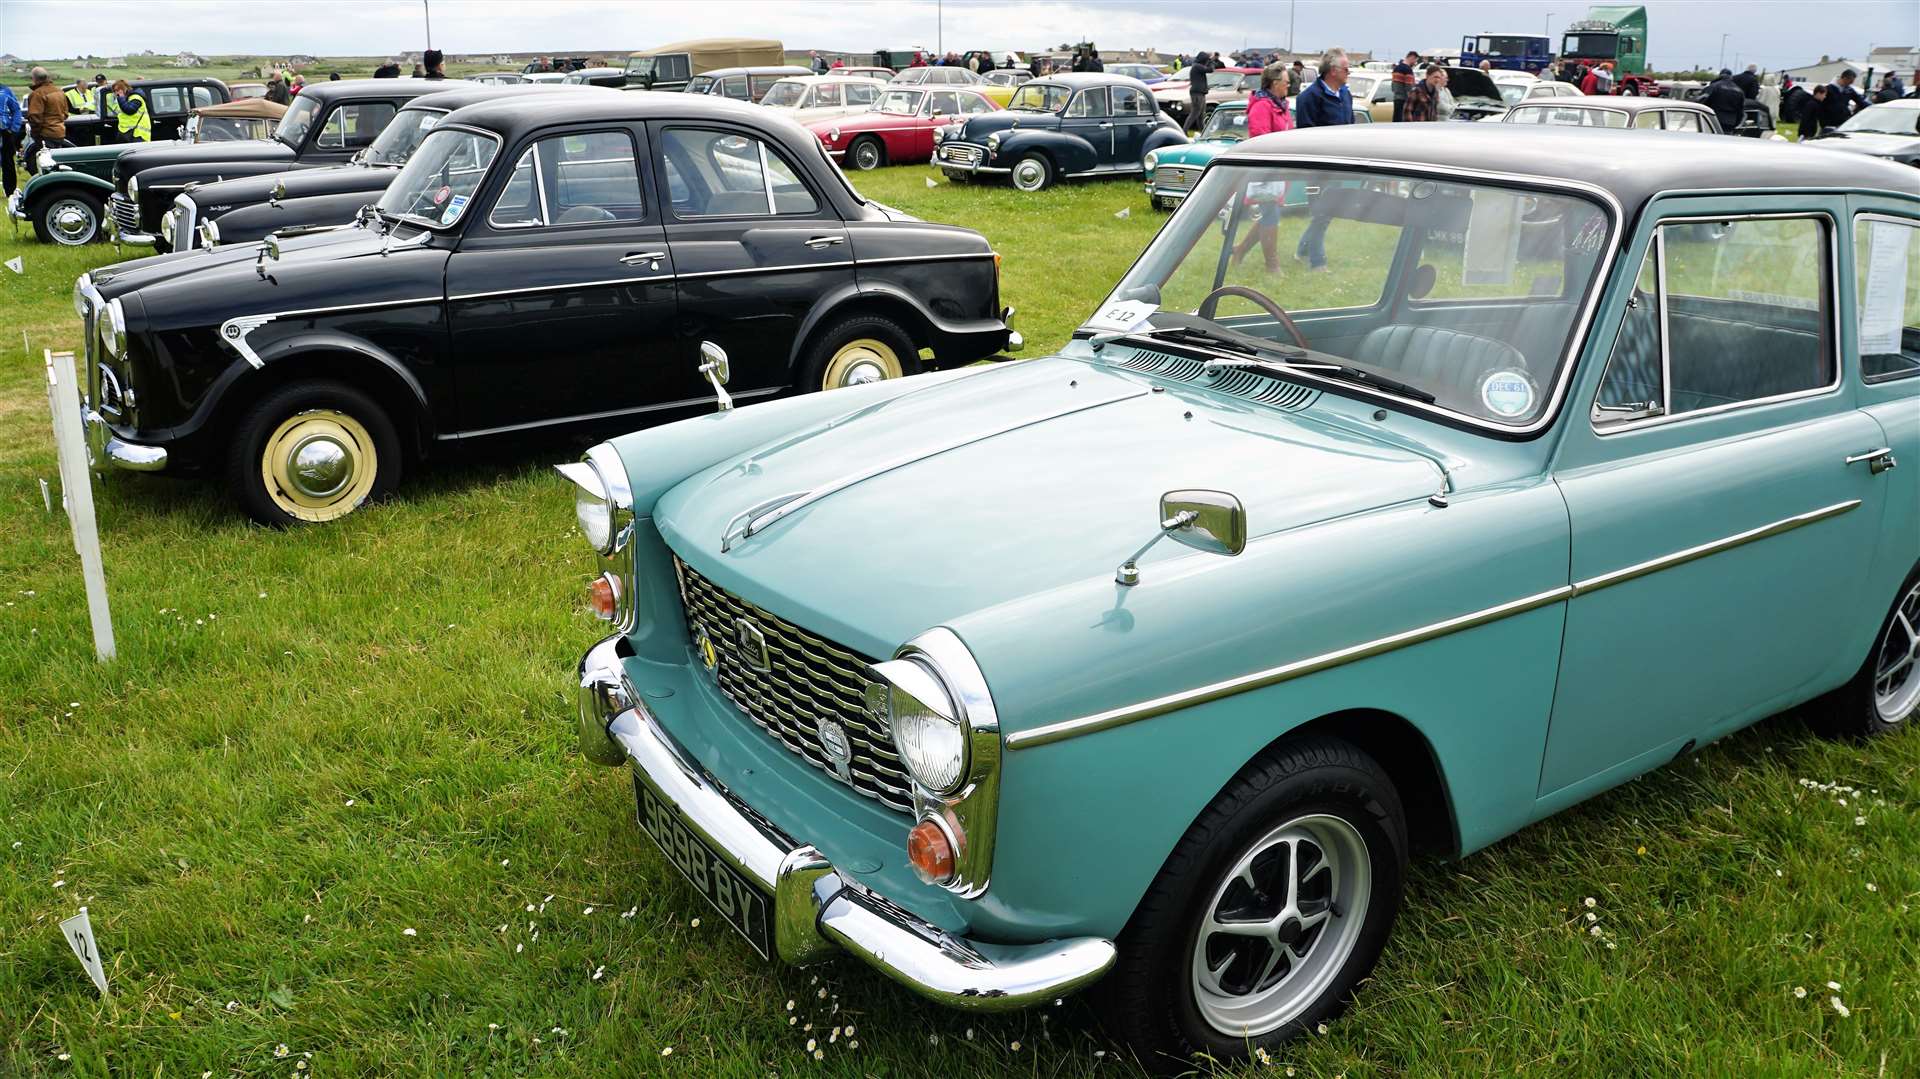 1961 Austin A40 Farina Mk 1 owned by John Bain from Inverness. Picture: DGS